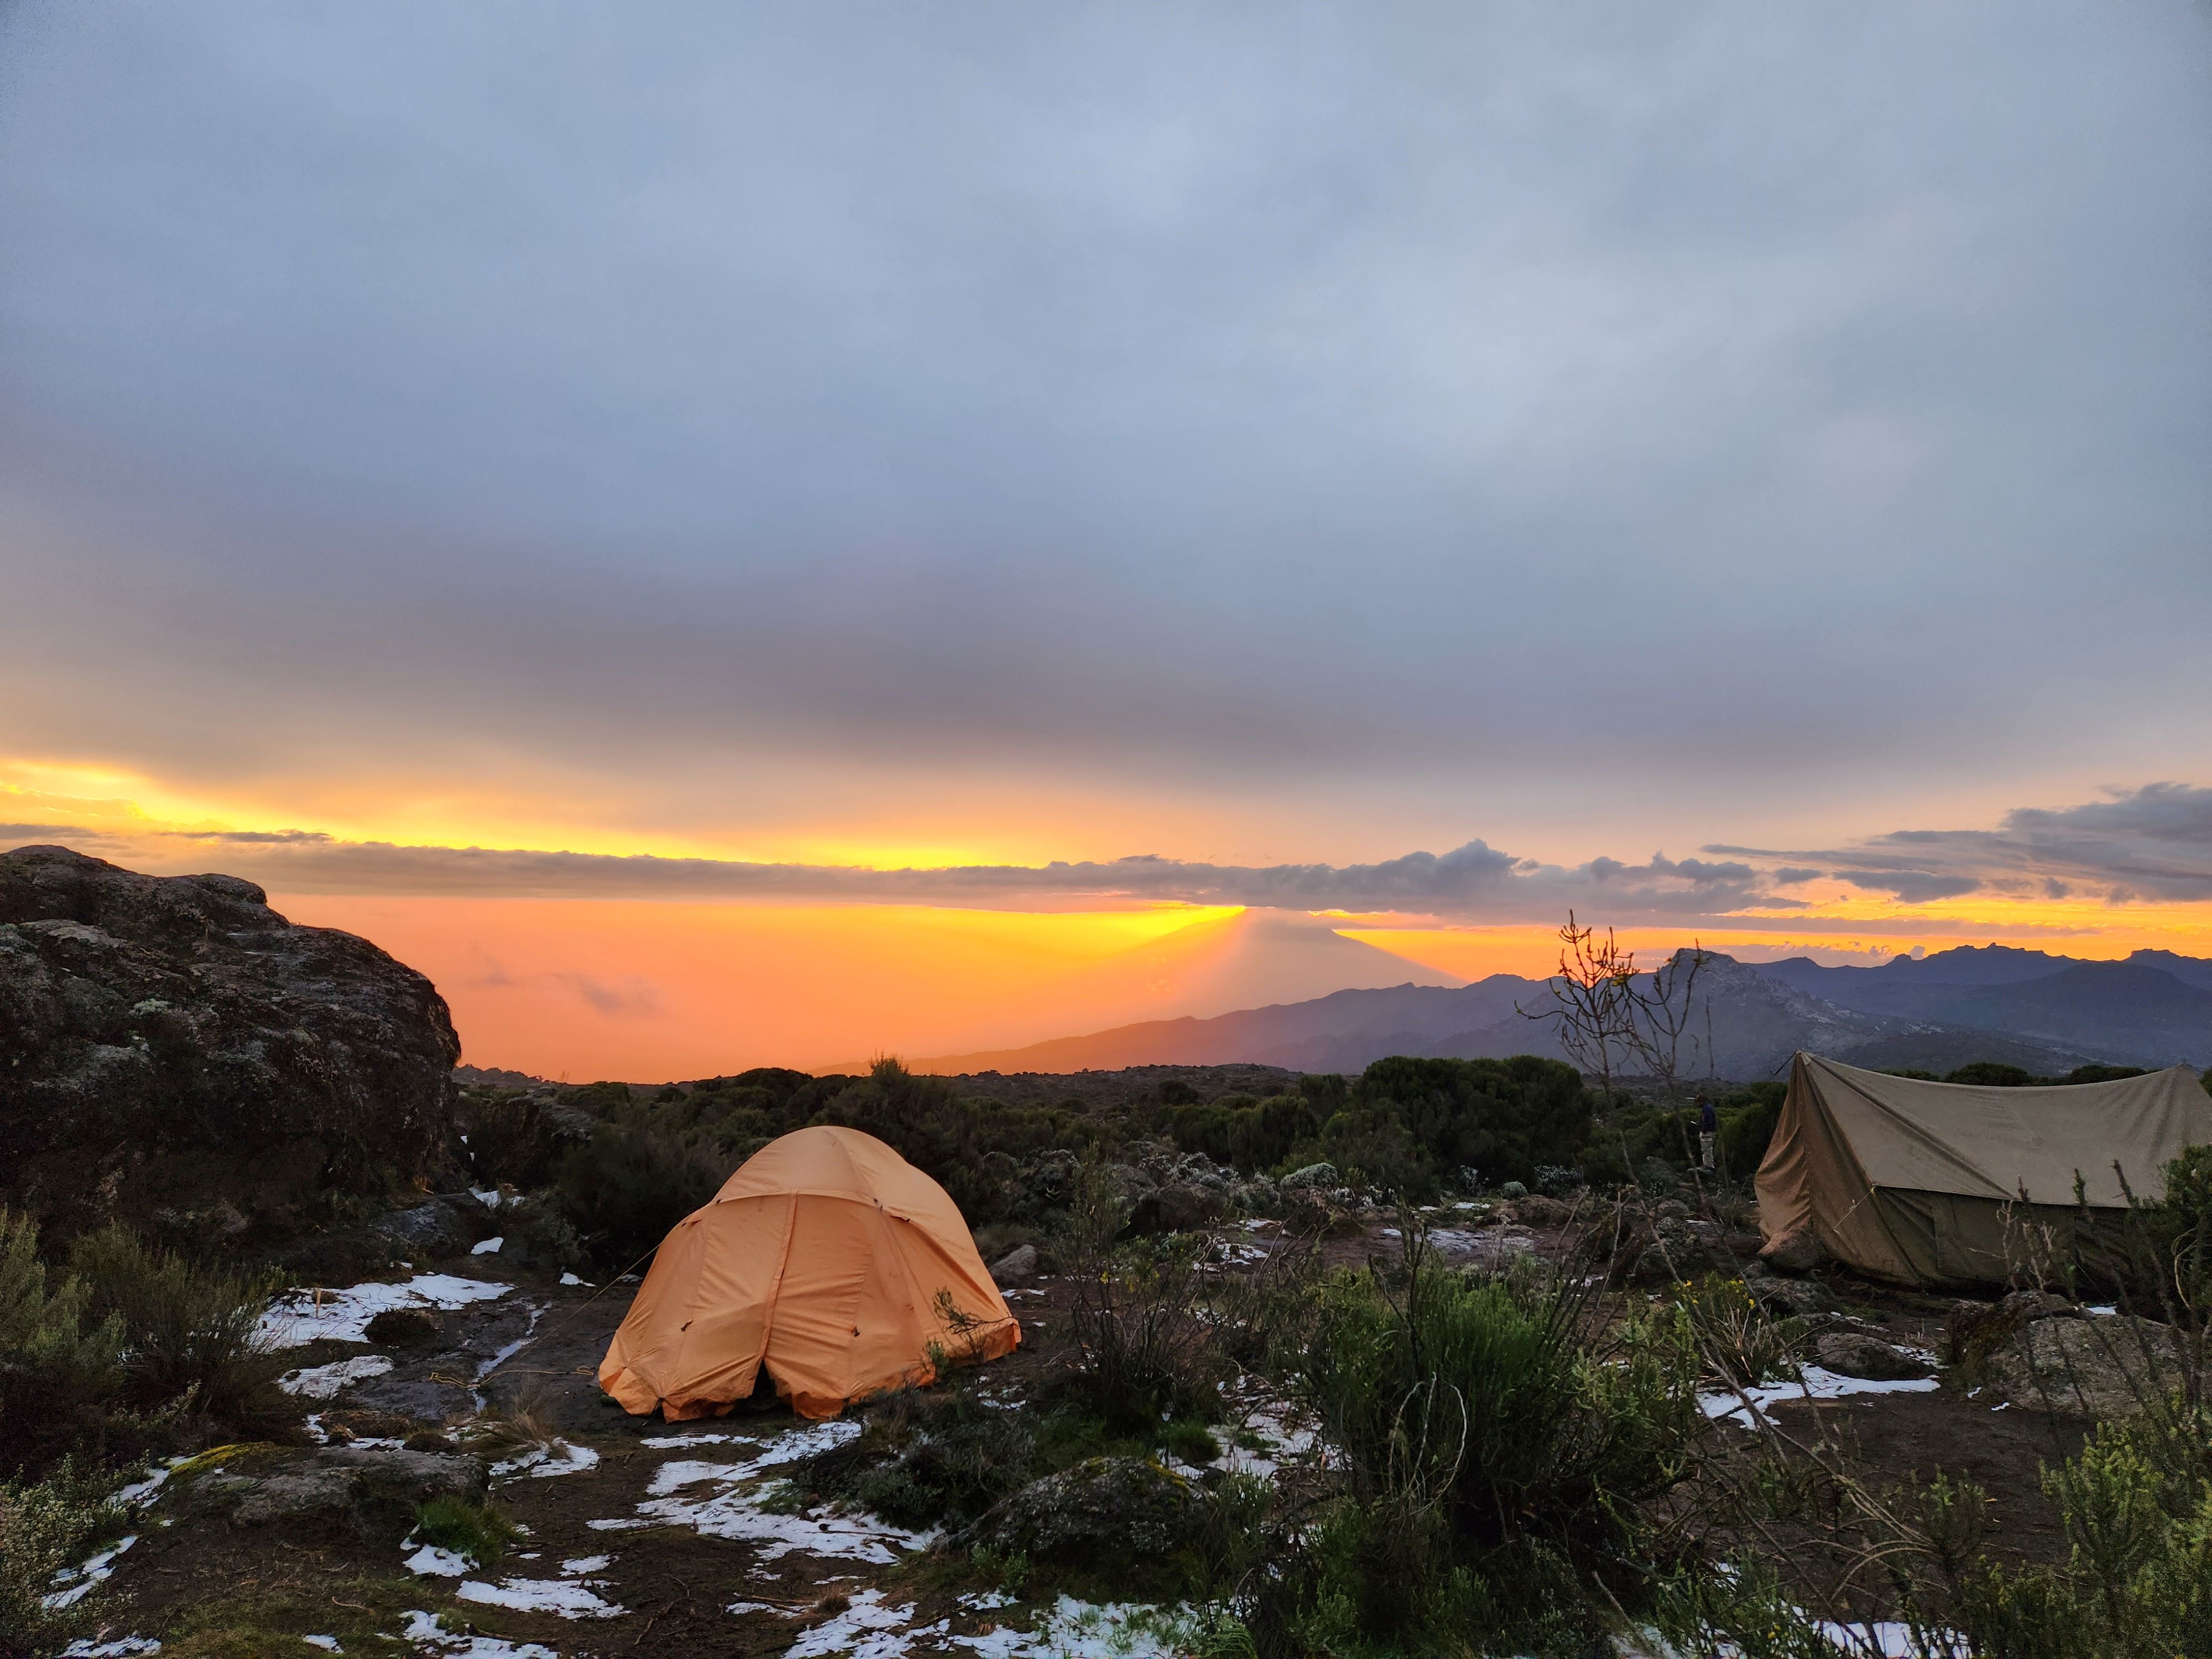 Sunset from icy camp